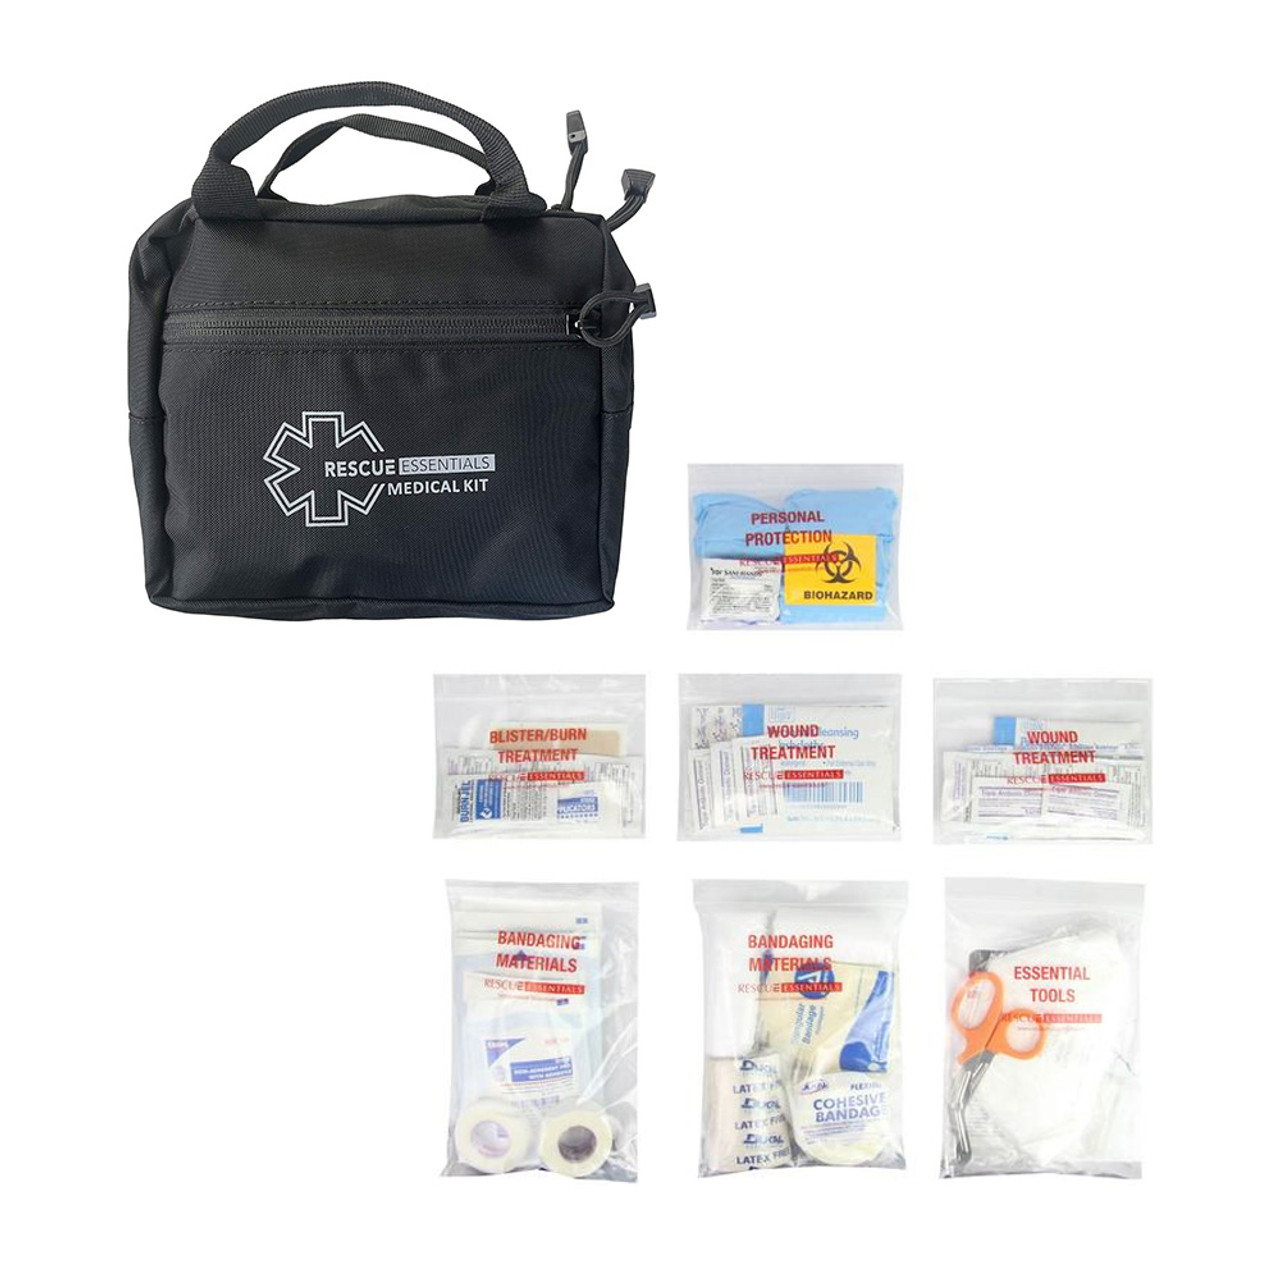 First Aid Kit Cars, First Aid Kit Bag, Car Emergency Kit, Medical Rescue